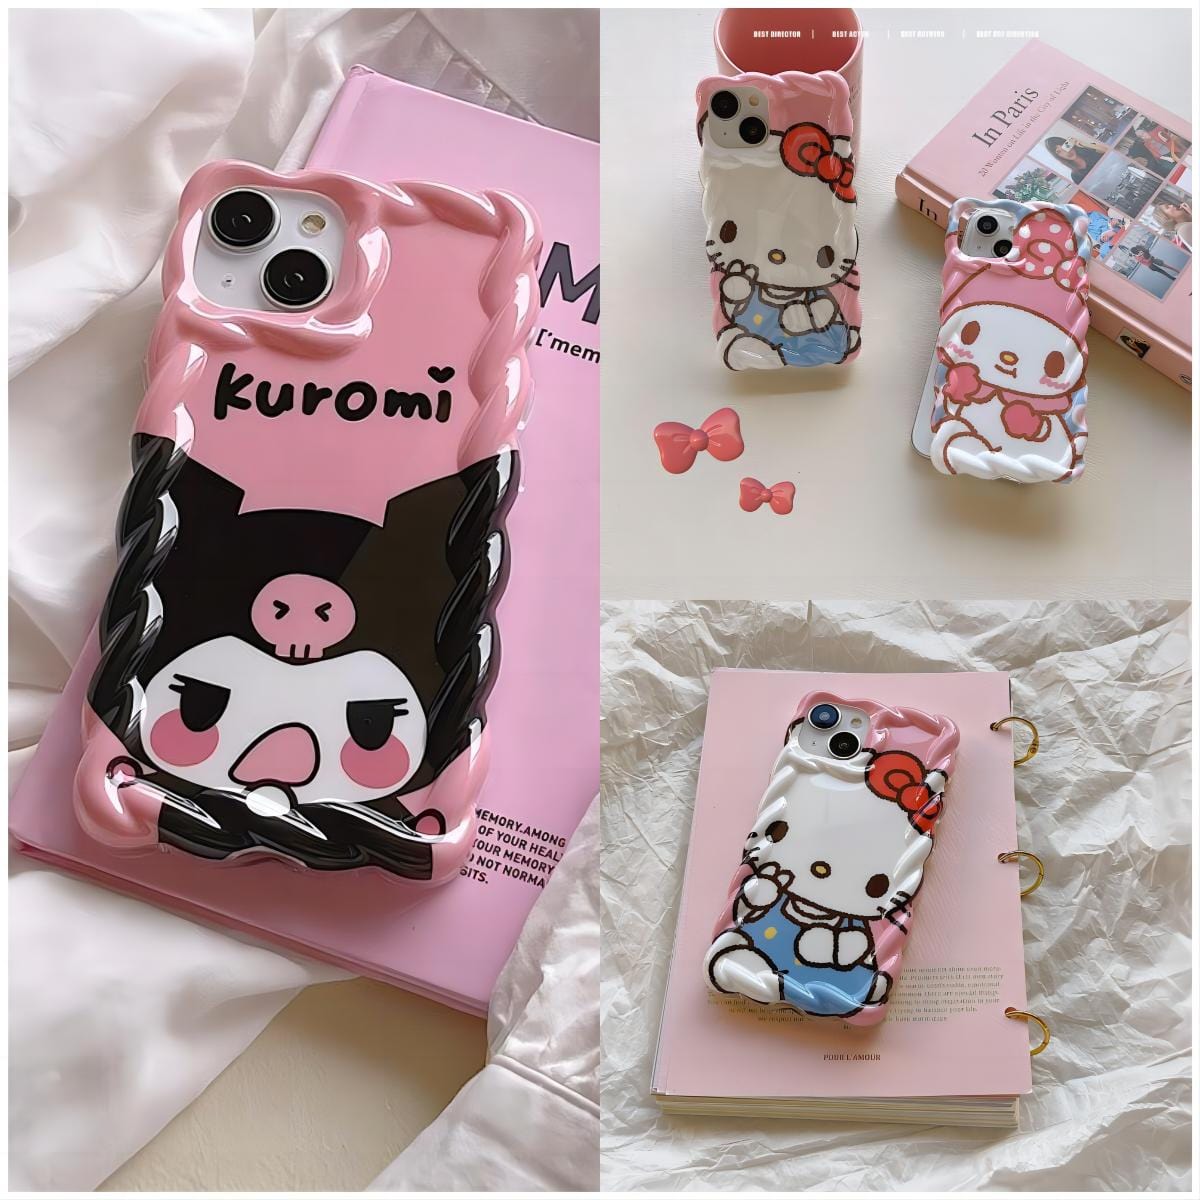 For iphone 6 6s Plus Case Kuromi Melody Phone Cover Anime Sanrio